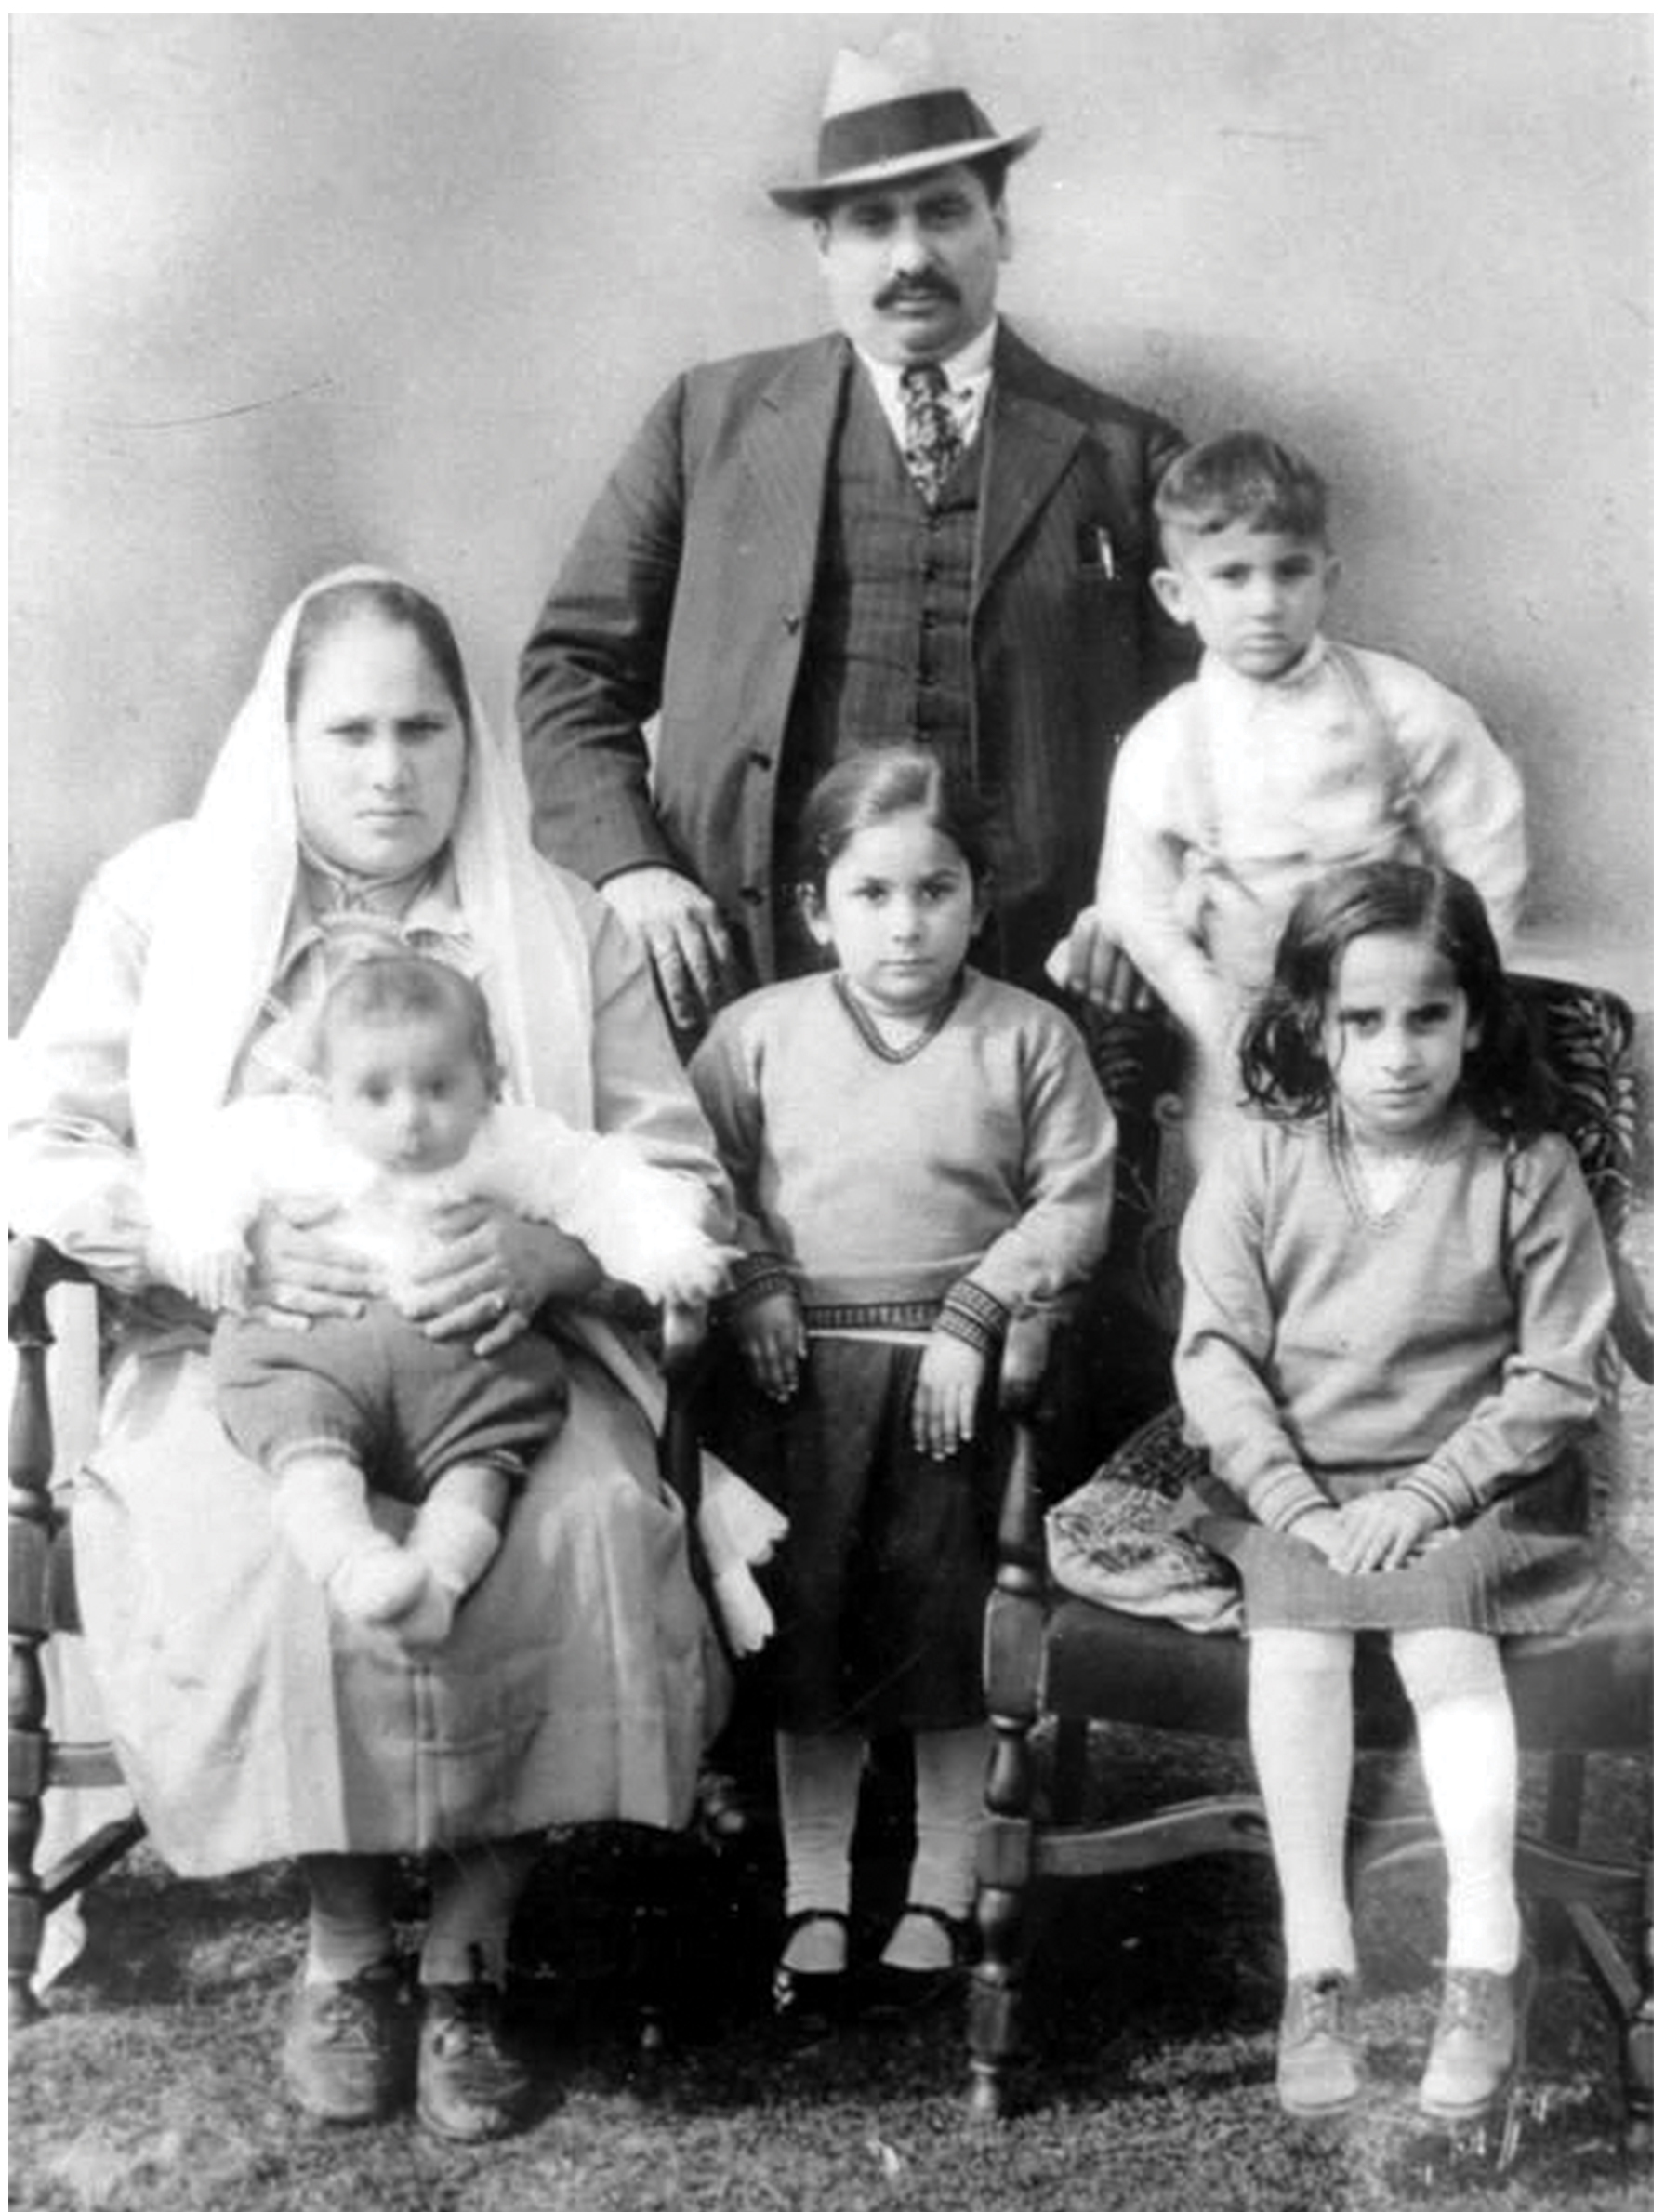 Mayo Singh Manhas & Family, Date unknown. Photo courtesy of the Mosaic of Forestry Memories.